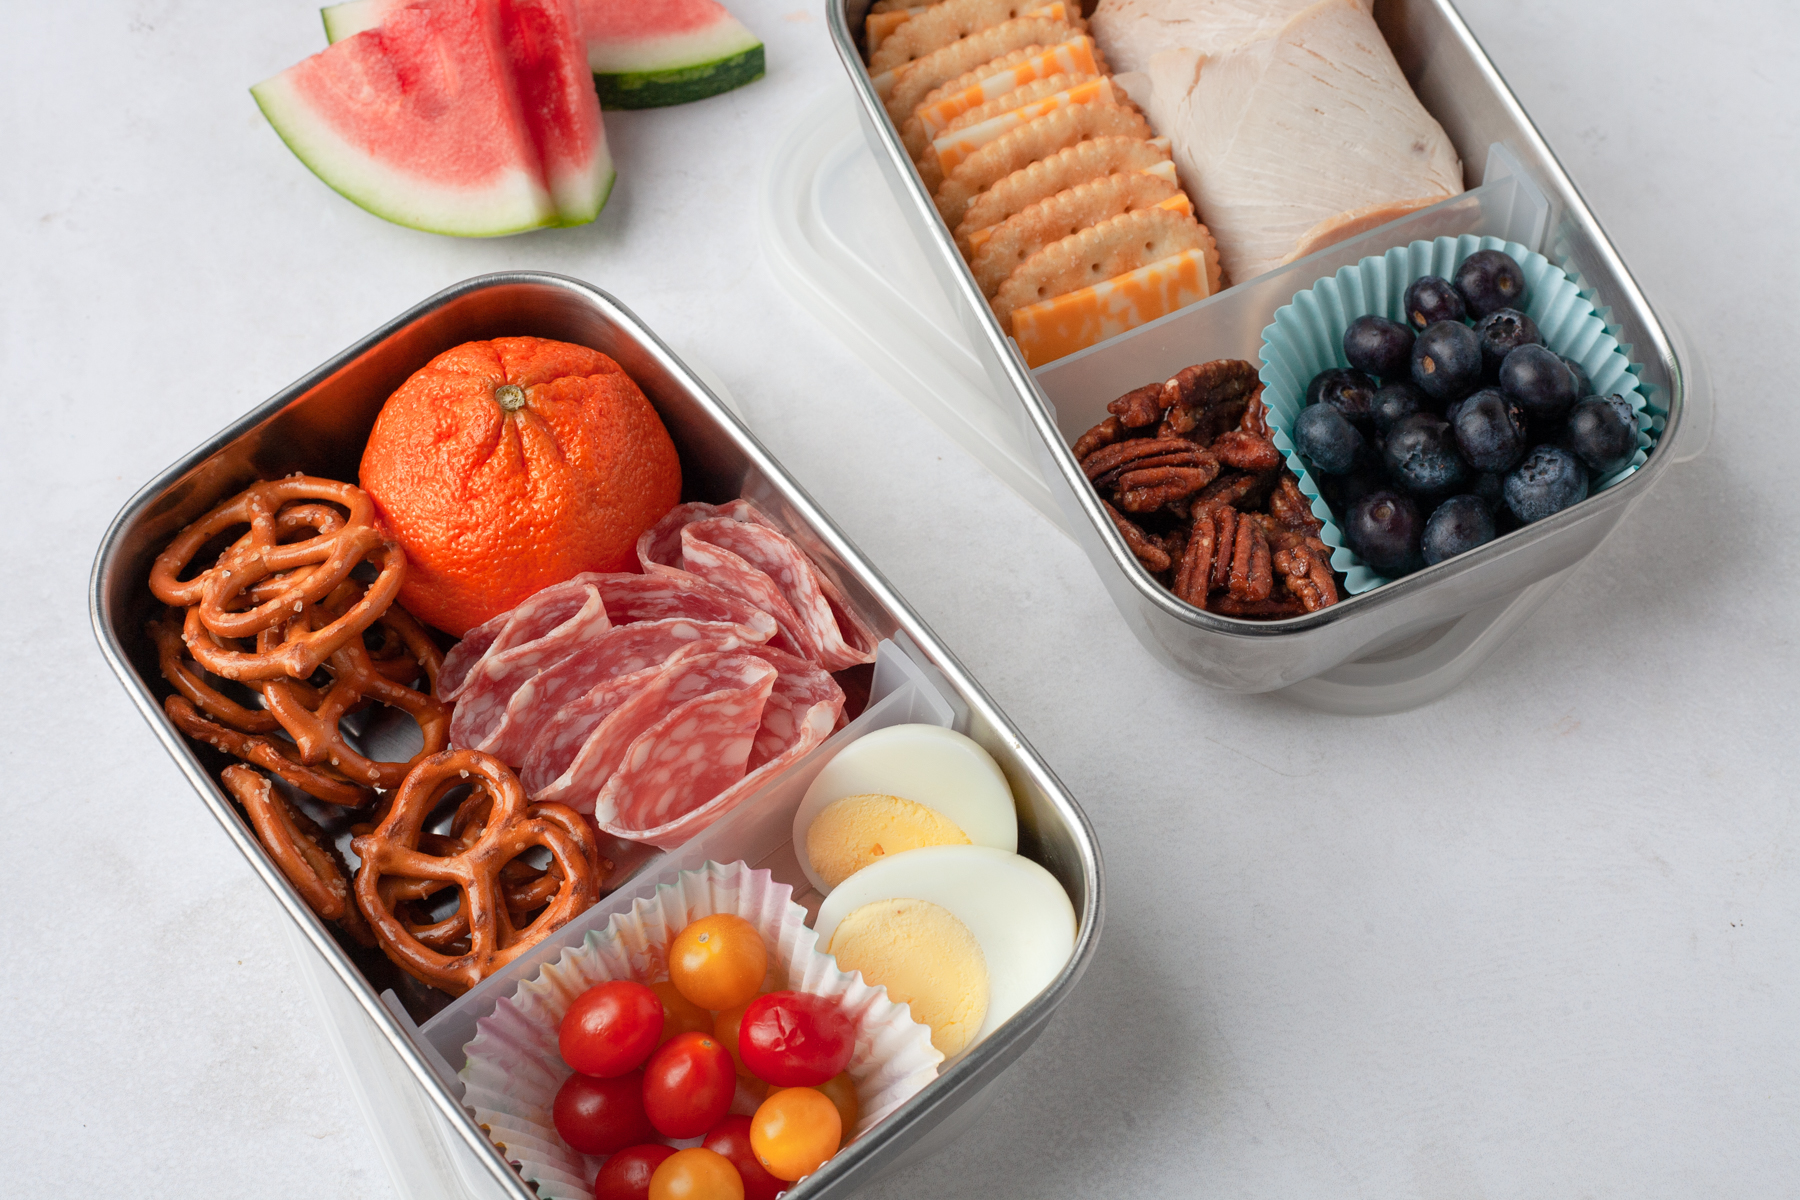 A Healthy Homemade Lunchable Your Kids Will Love…Plus a Bento